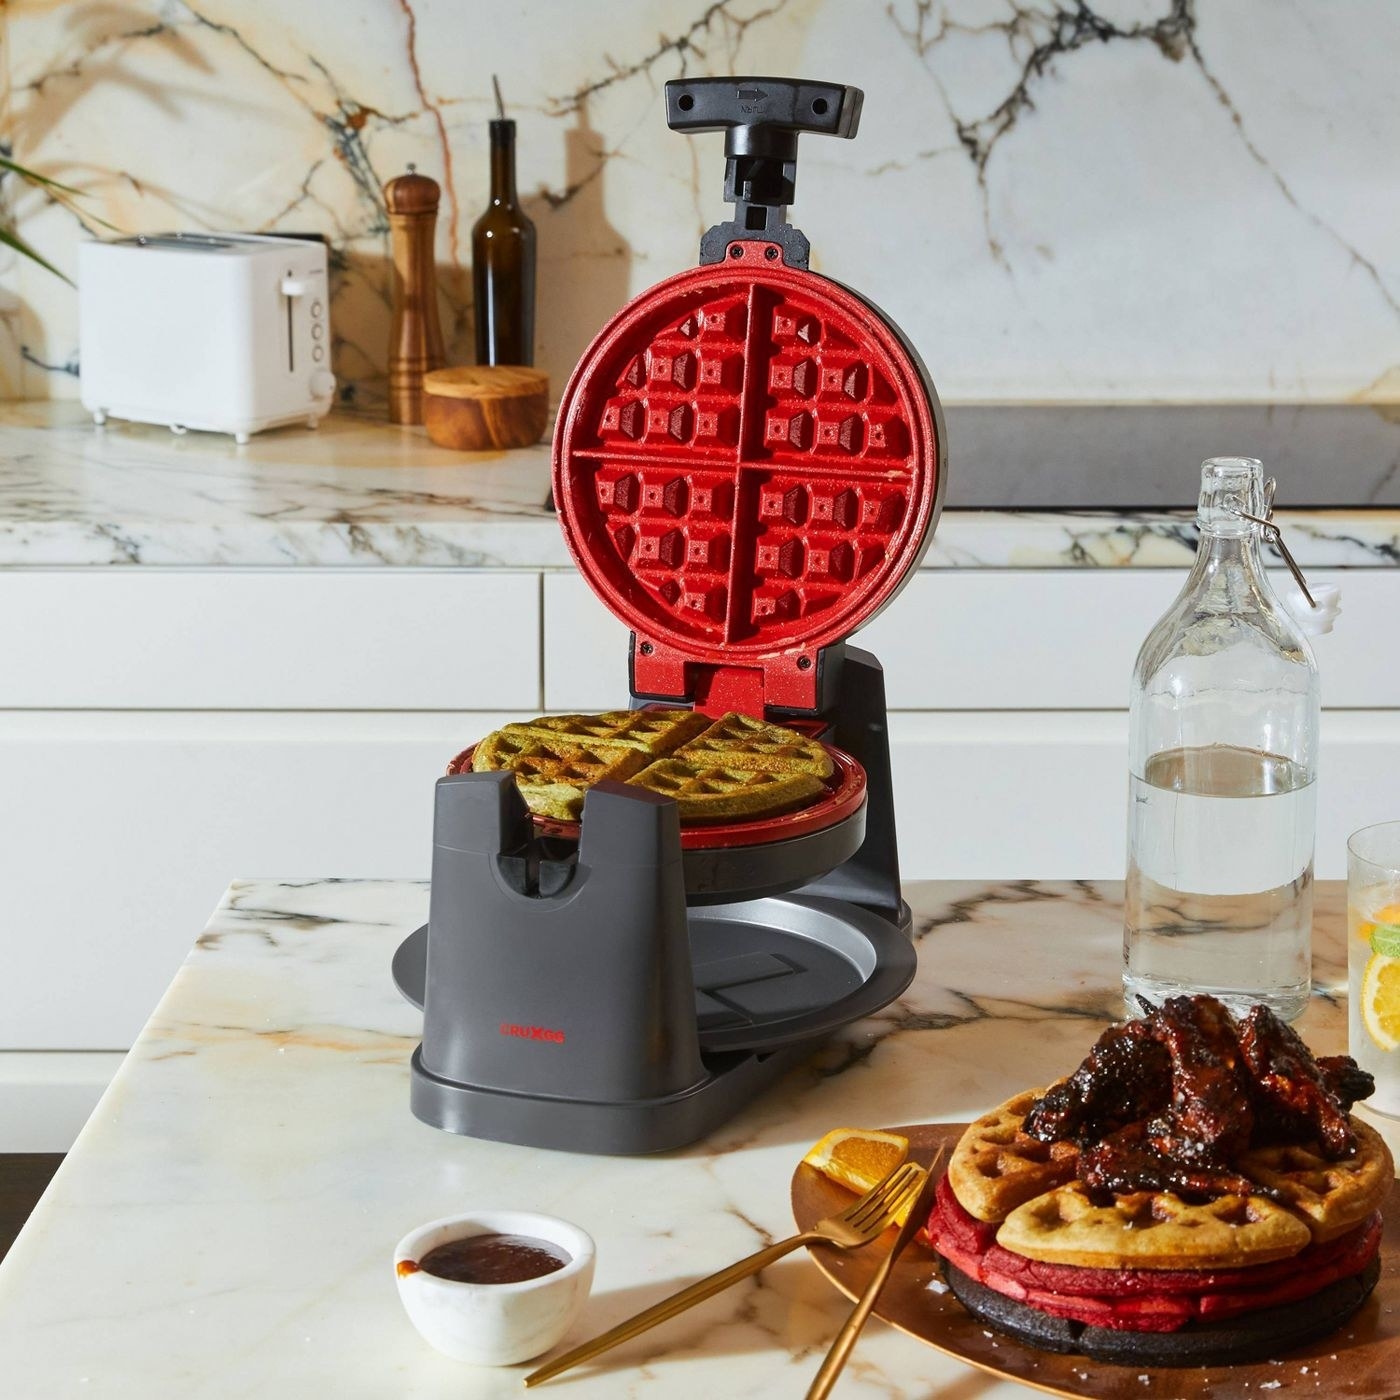 A Belgian waffle sits in a red and grey device, with a stack of beautiful waffles nearby.